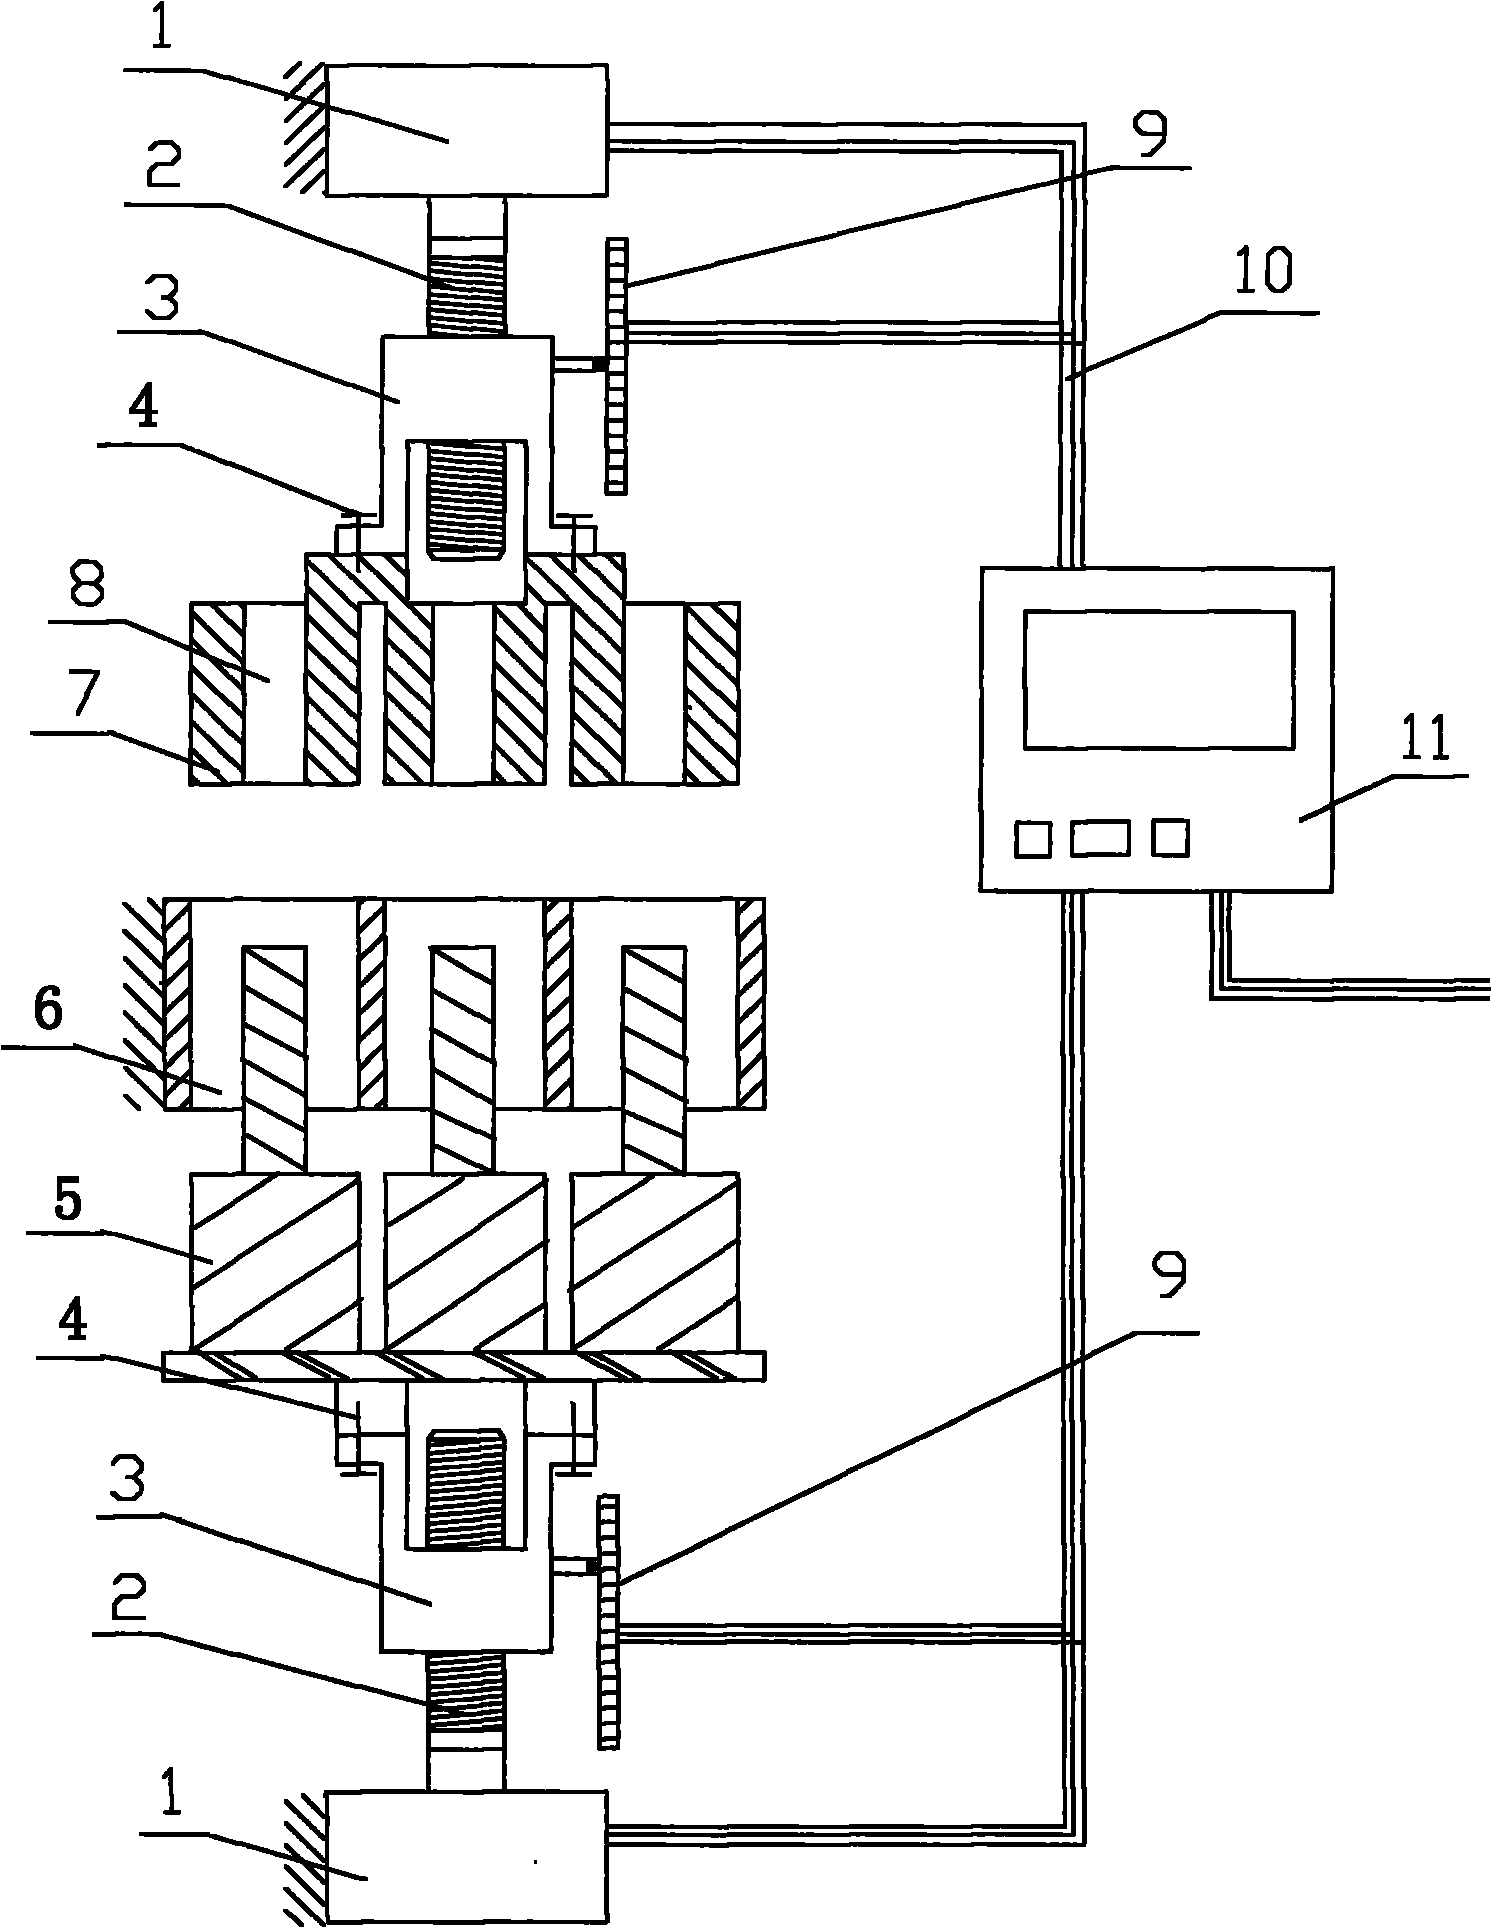 Hollow sample making device